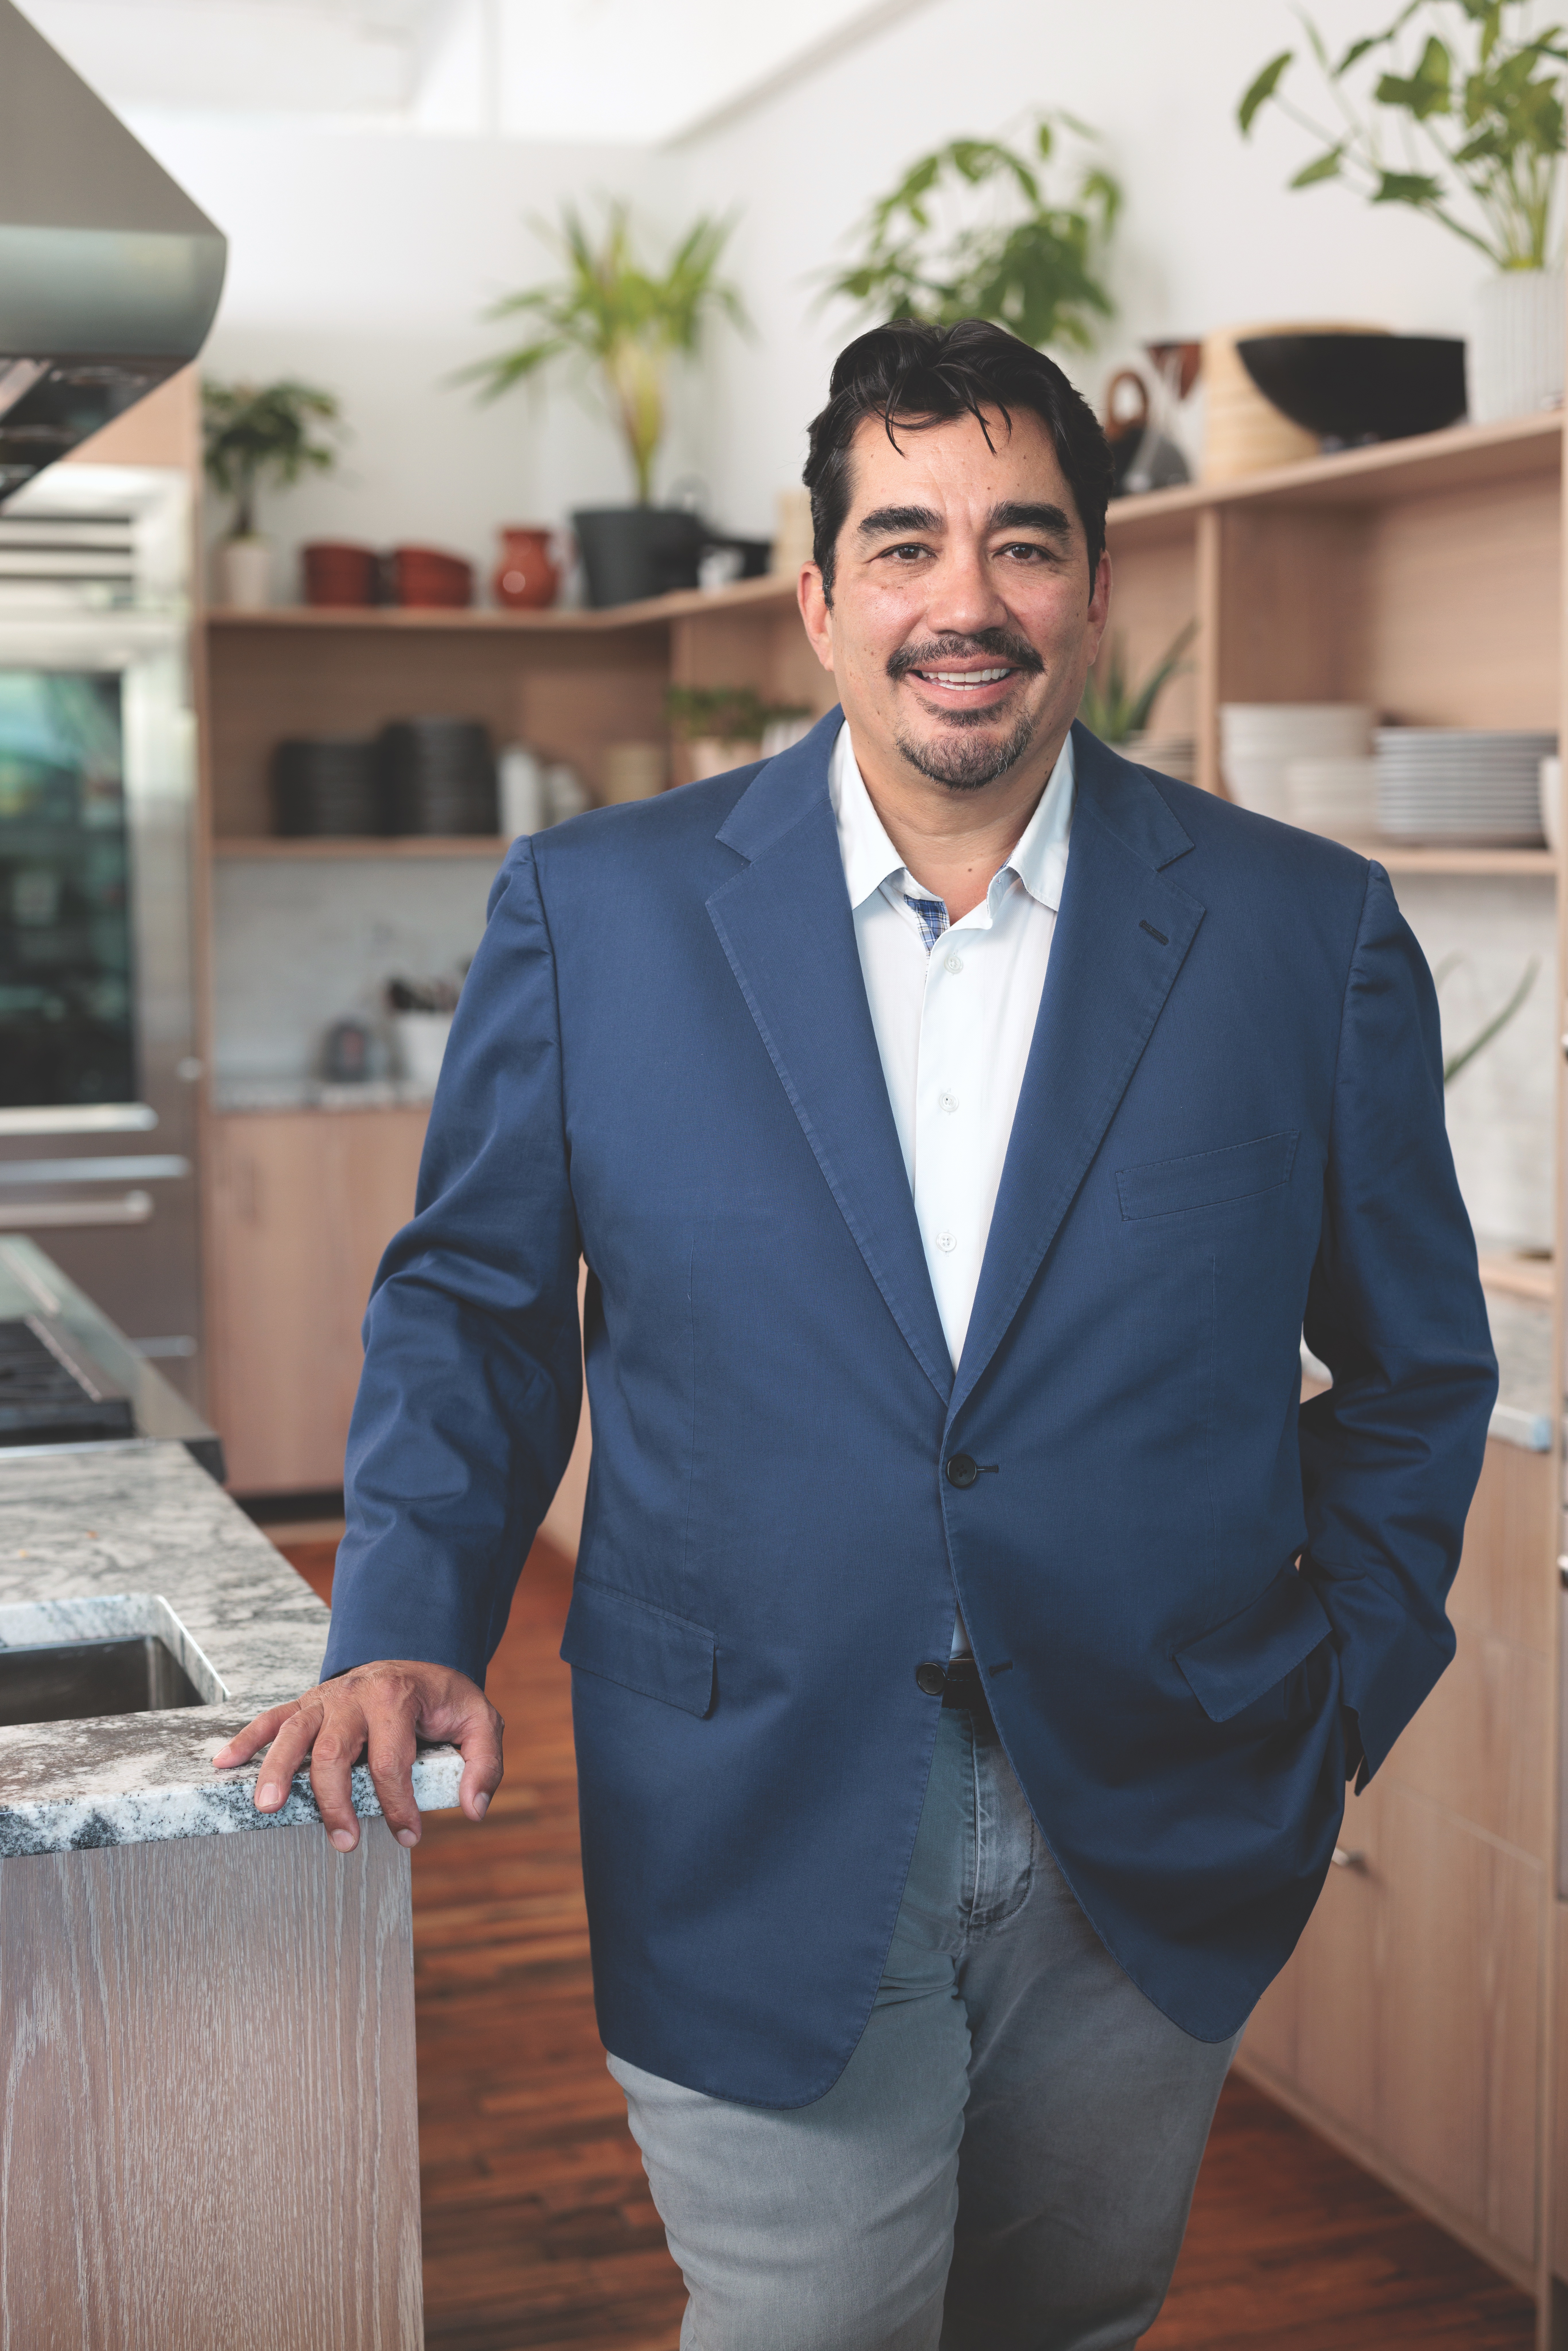 Food has been a key part of Garces' life since his childhood, cooking with his mother and grandmother. Photo: Harrison Brink/AL DÍA News.